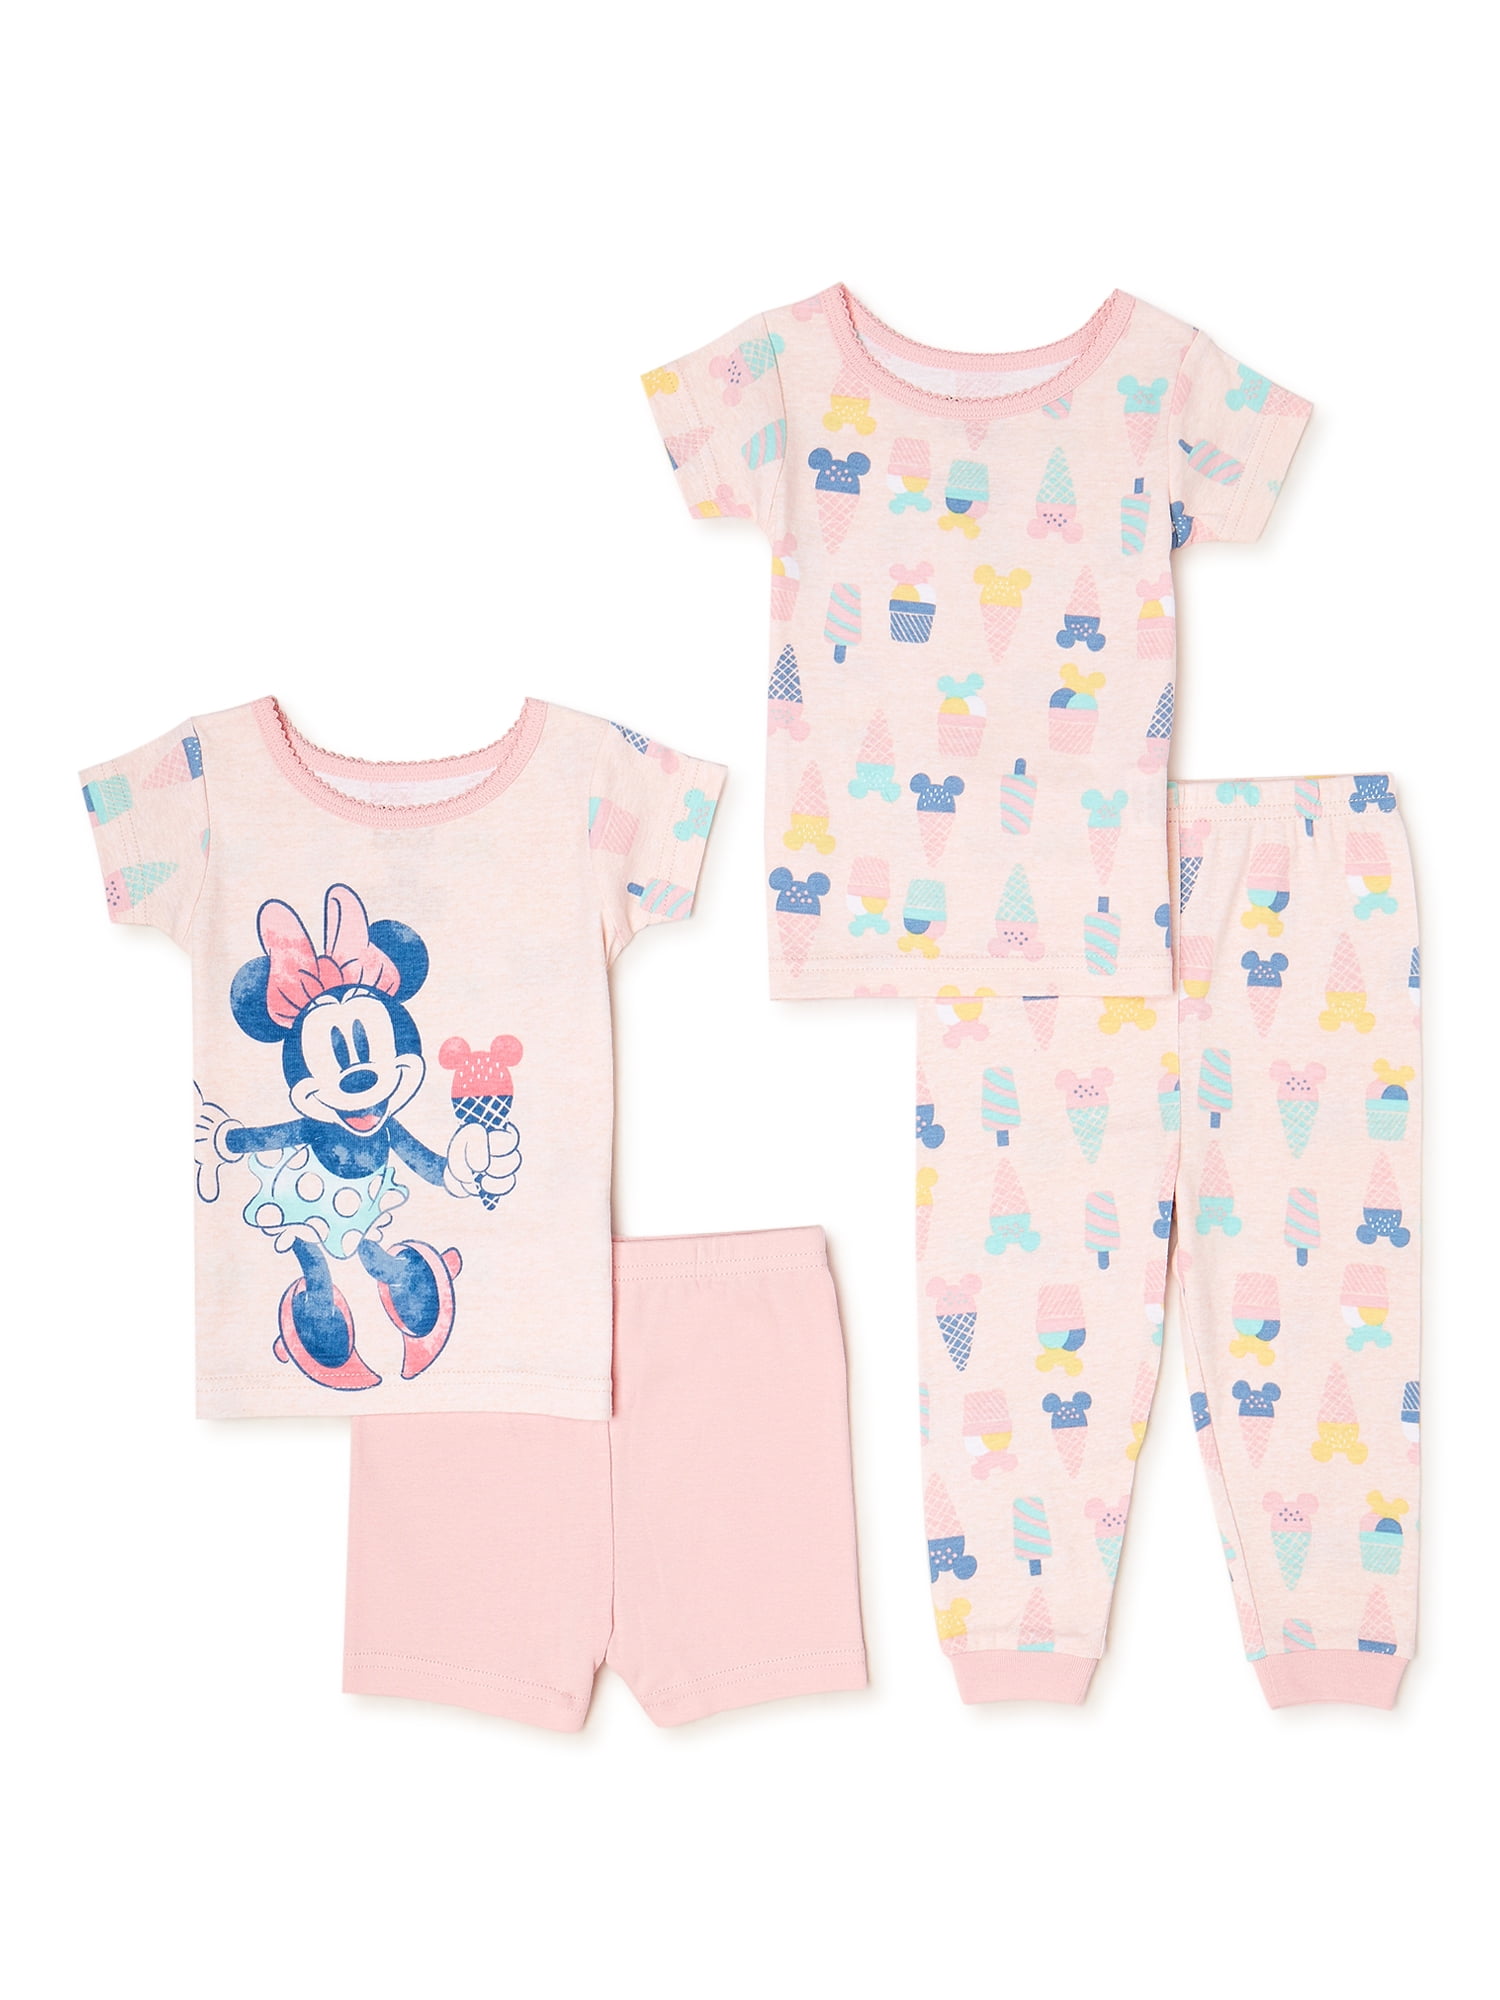 Details about   Disney  Minnie Mouse Toddler Girl's Pajama Shirt & Pants  4T 